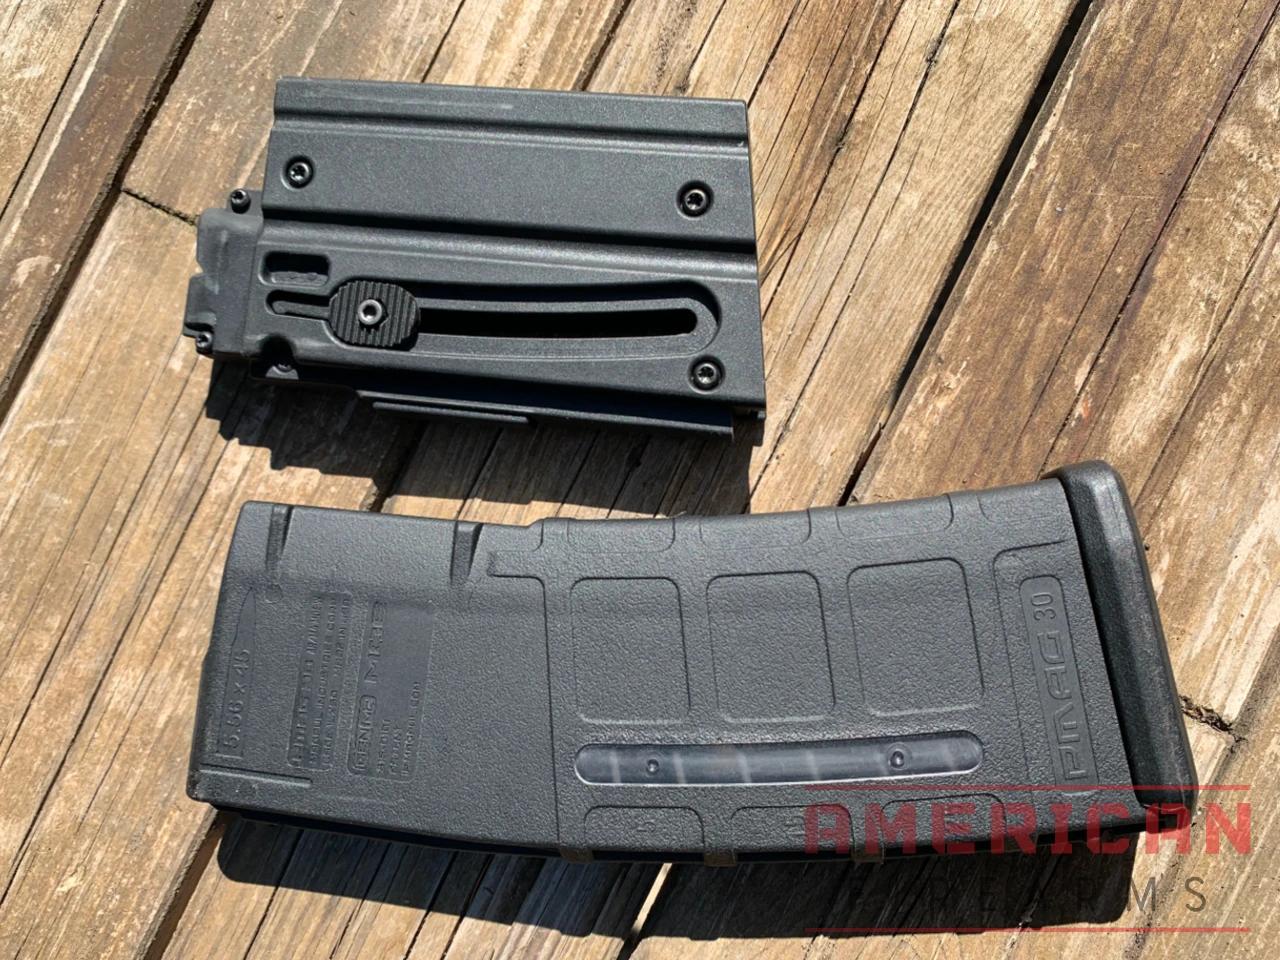 The HK416 mag (top), pictured here next to a PMAG, is dimensionally similar to a standard AR mag.